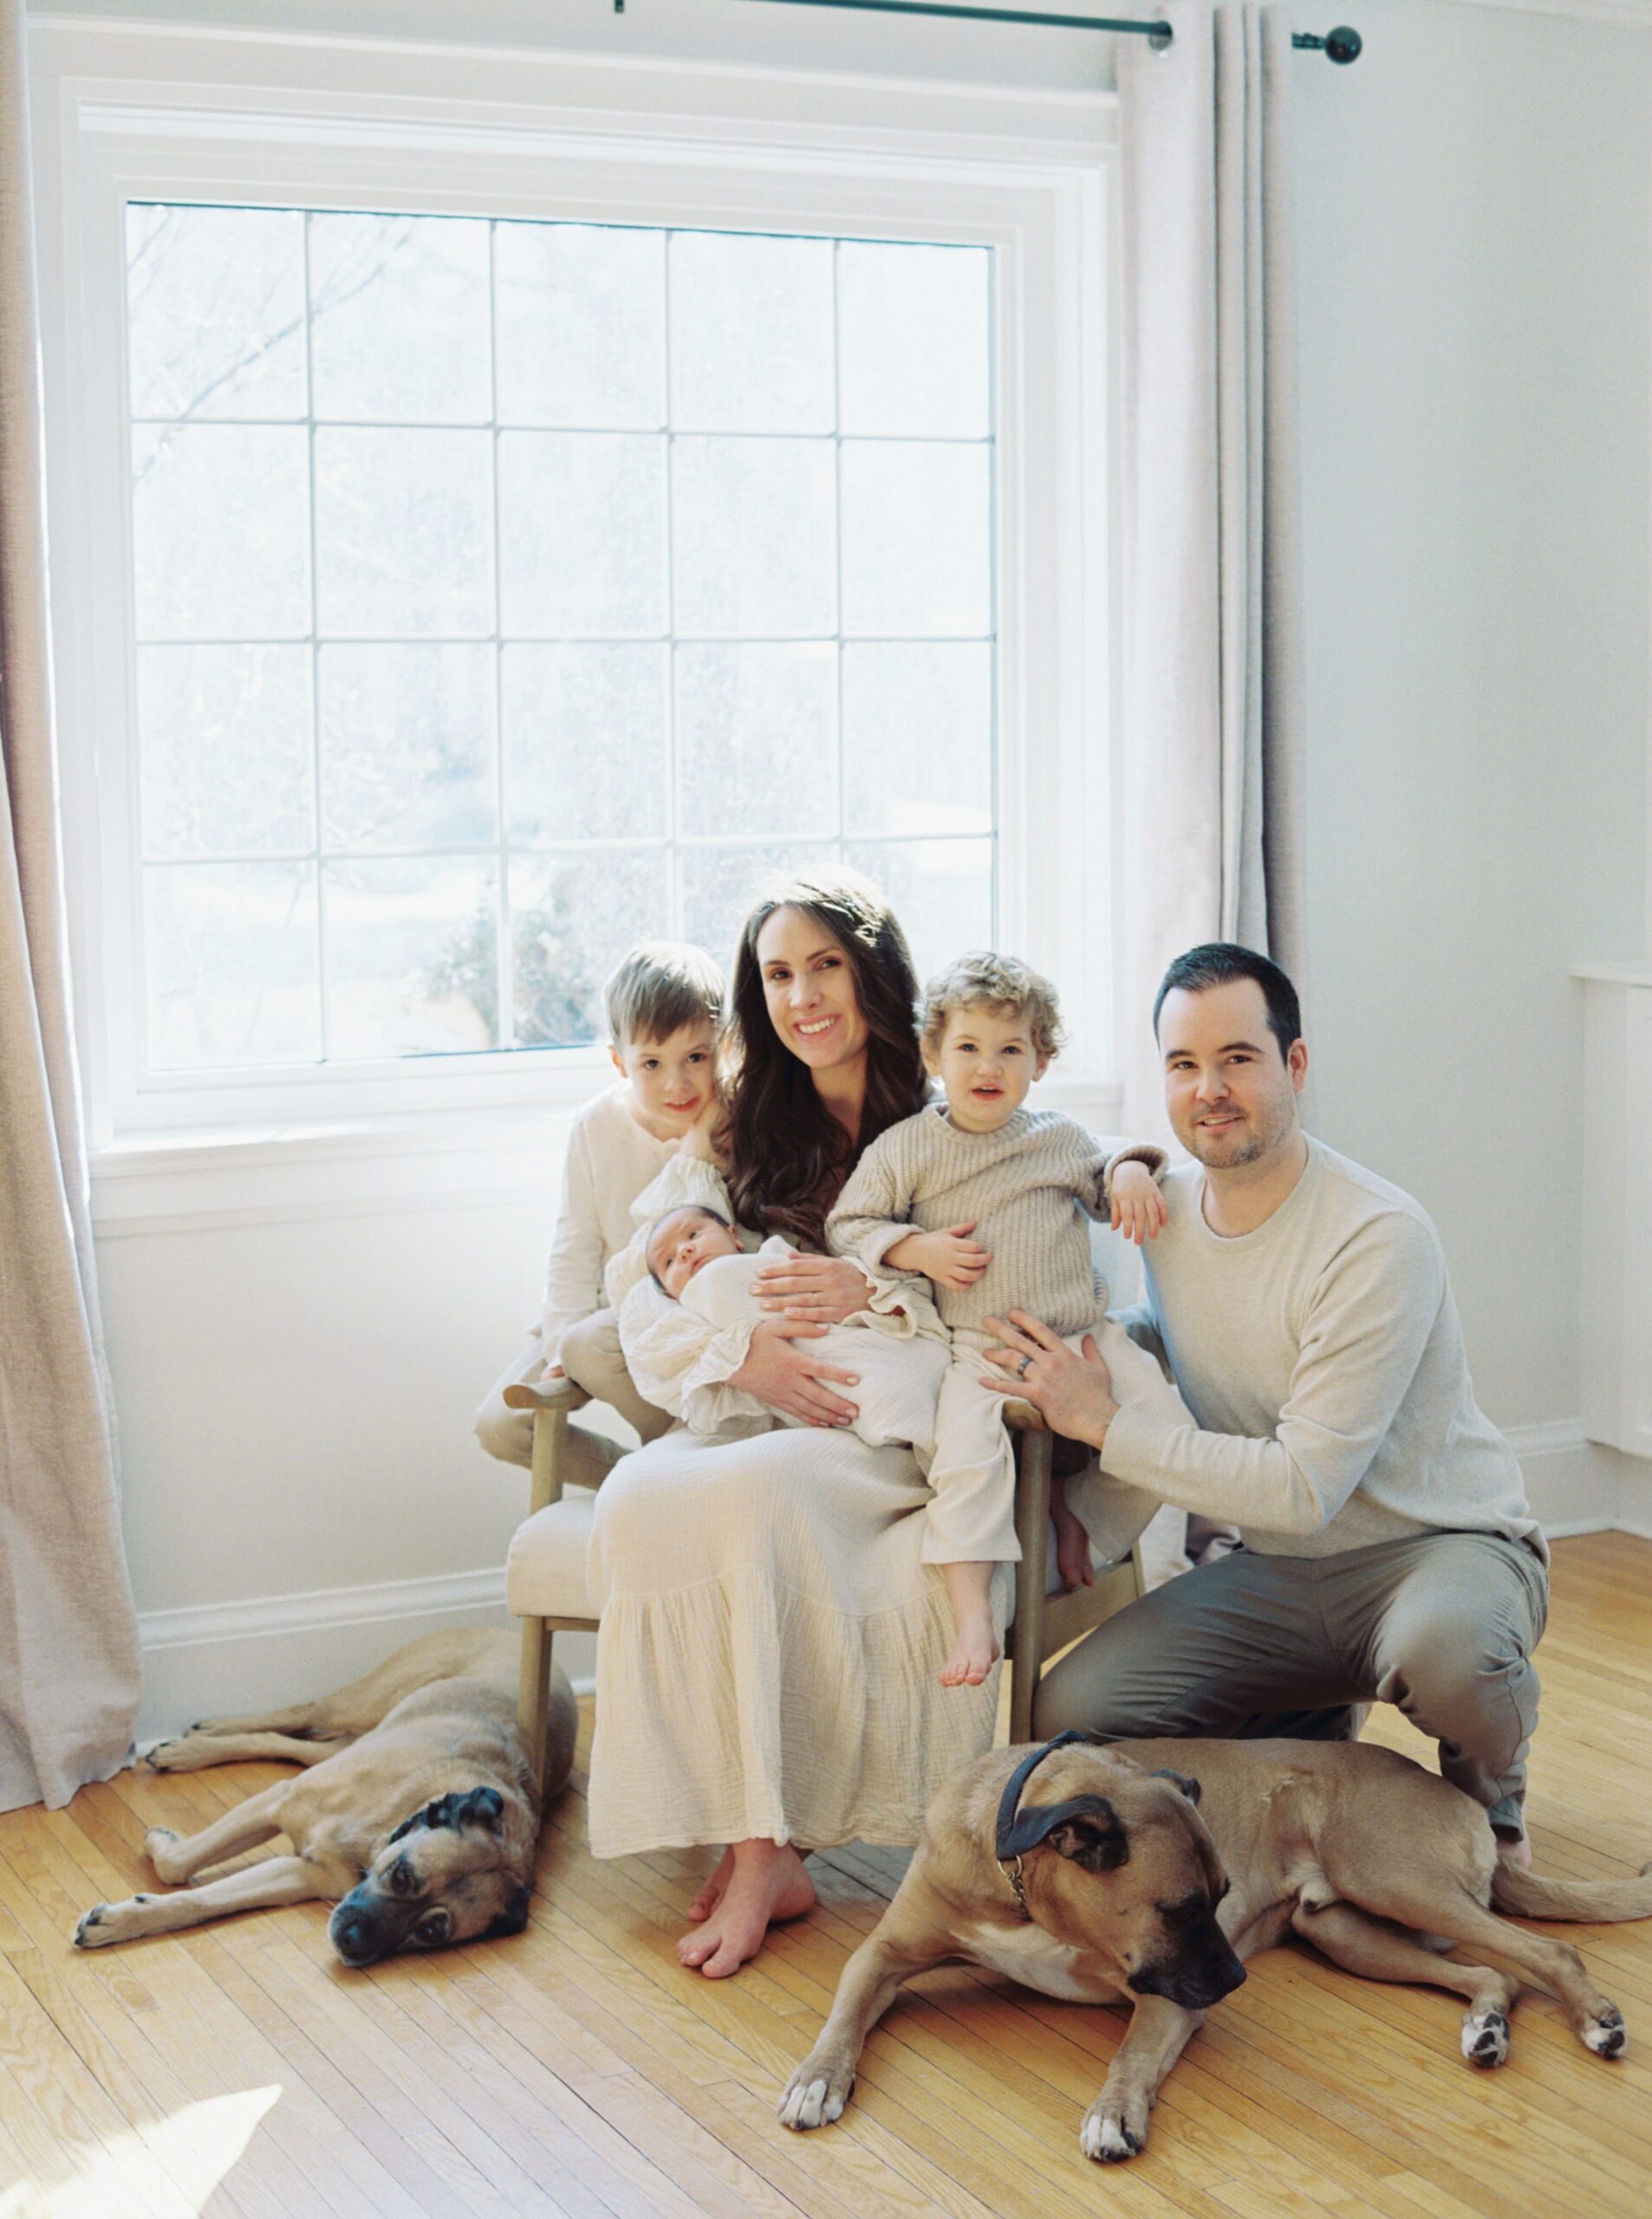 Photographer, Maranda Elysse with her family and two dogs.